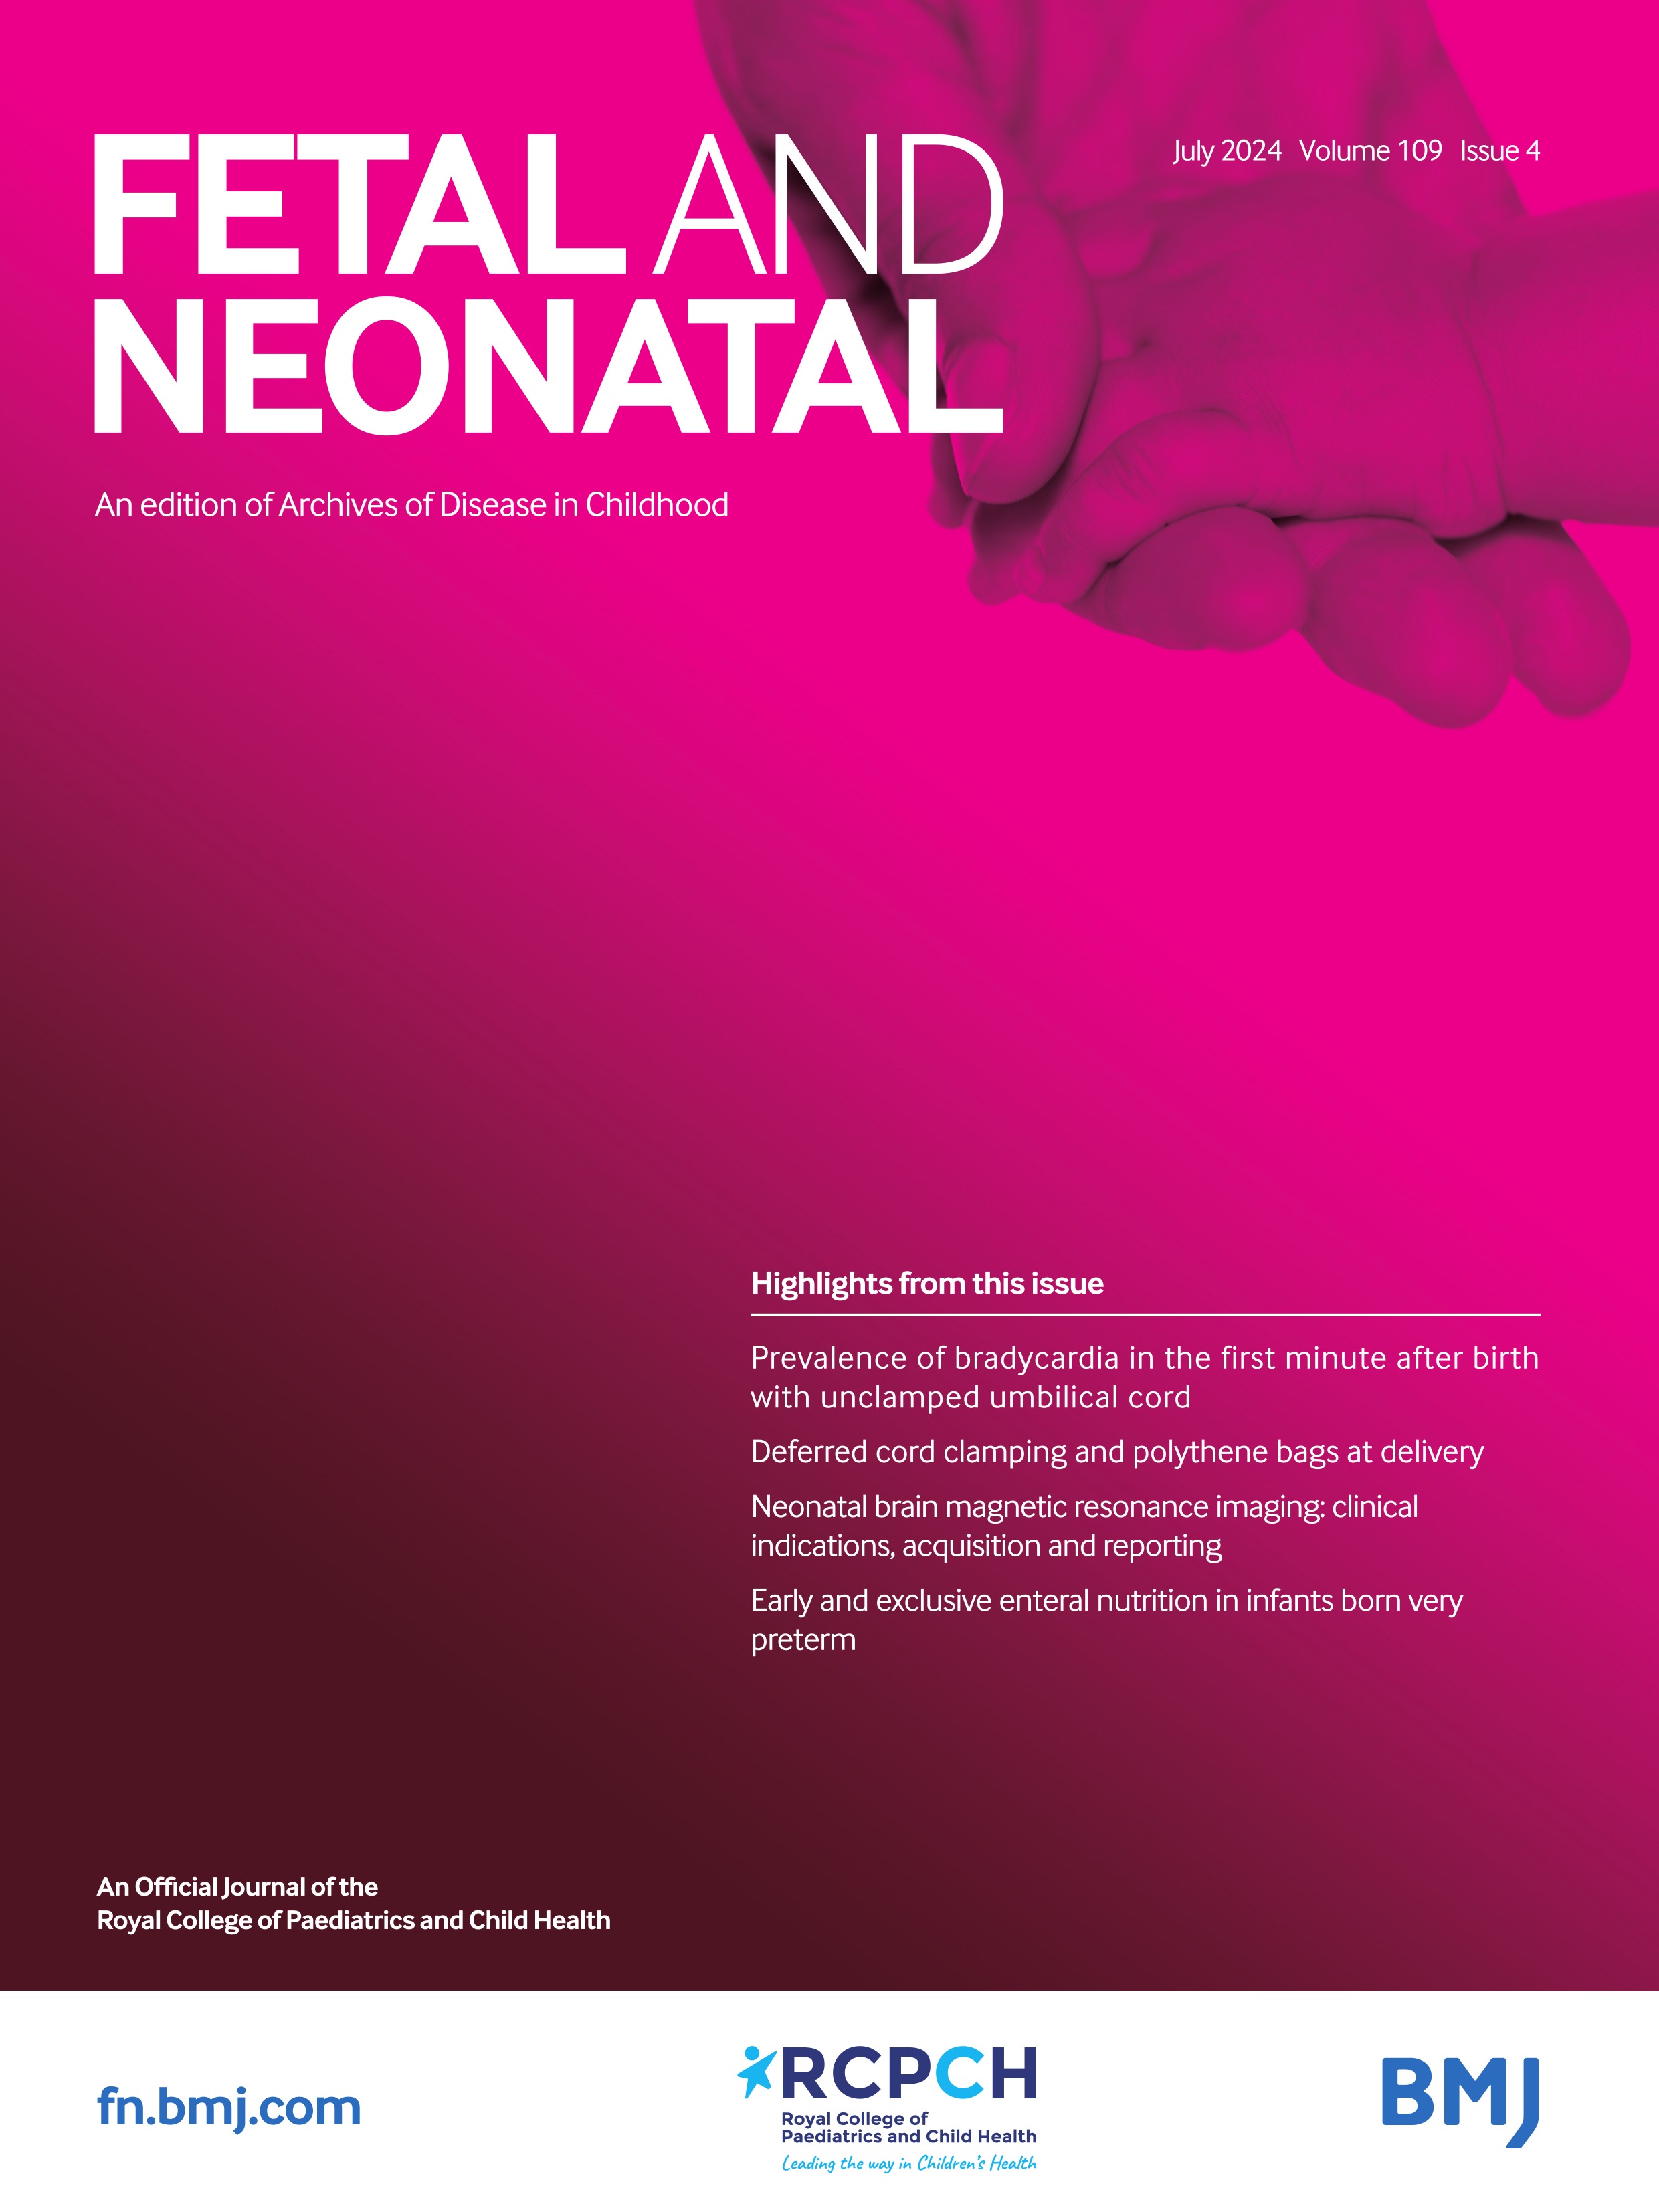 Dextrose gel prophylaxis for neonatal hypoglycaemia and neurocognitive function at early school age: a randomised dosage trial